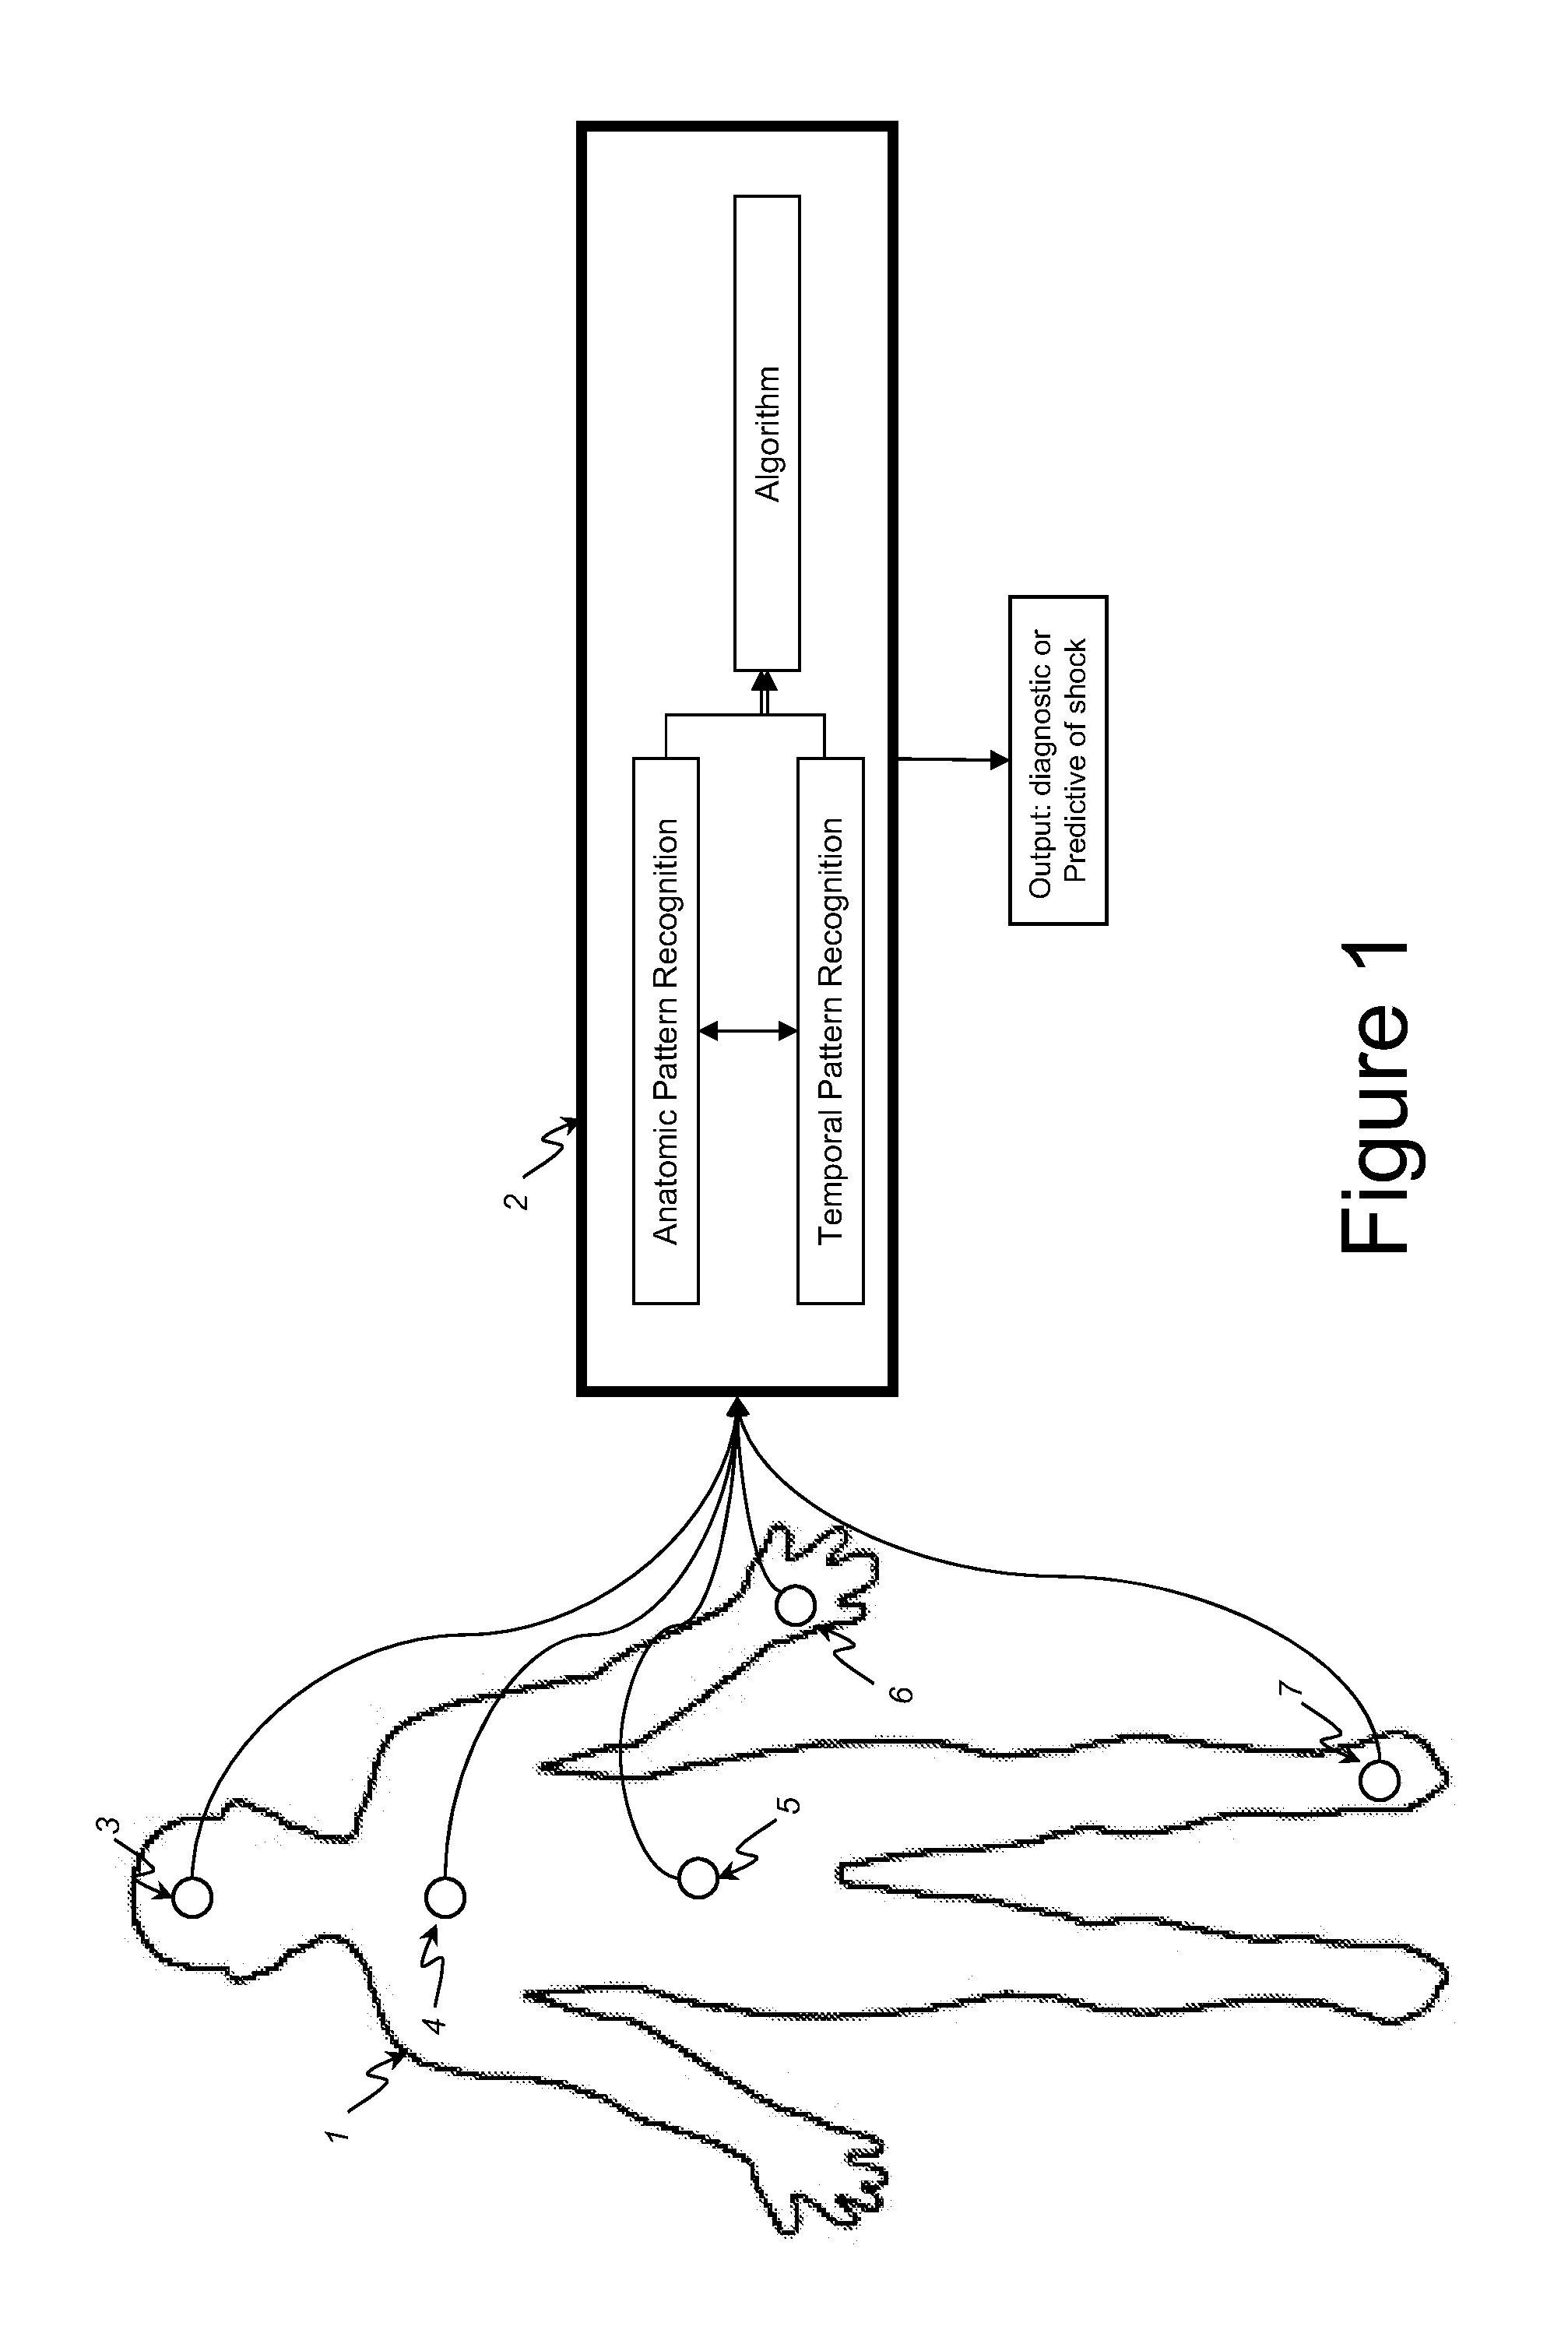 Method for the discovery, validation and clinical application of multiplex biomarker algorithms based on optical, physical and/or electromagnetic patterns